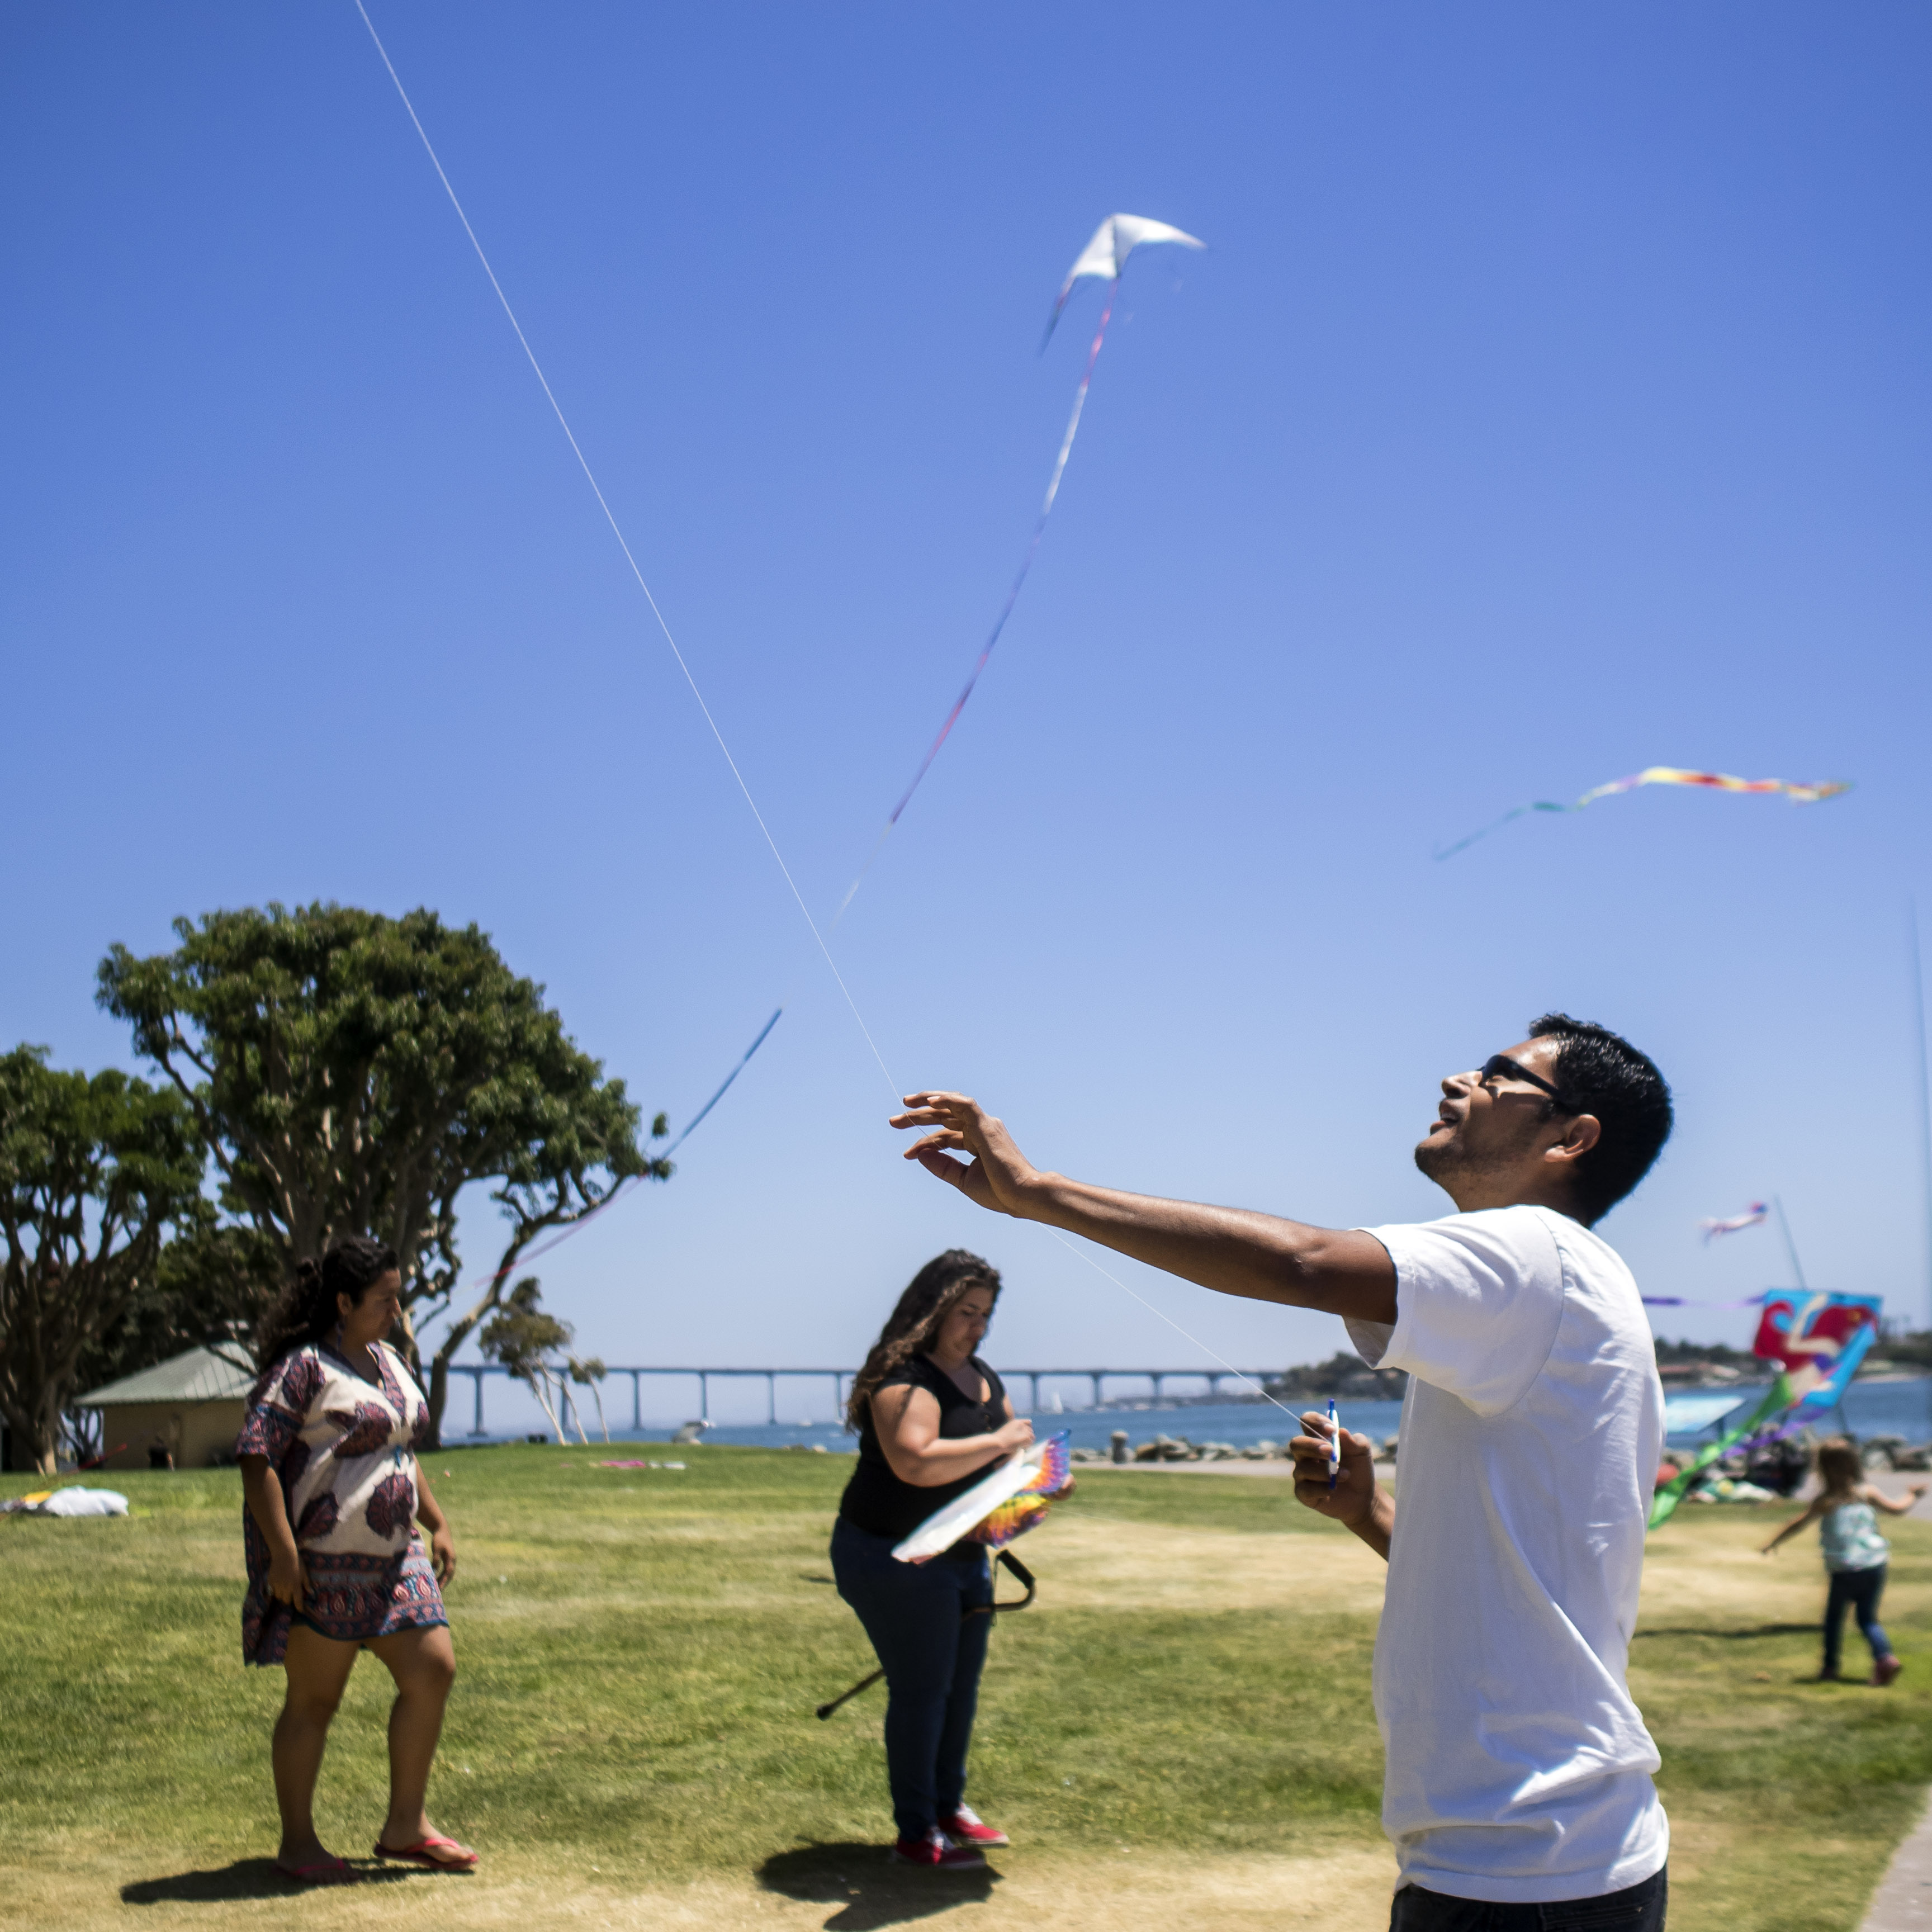 Young people taking part in a mental illness prevention program called Kickstart fly kites at San Diego's Seaport Village. Marvi/KQED)